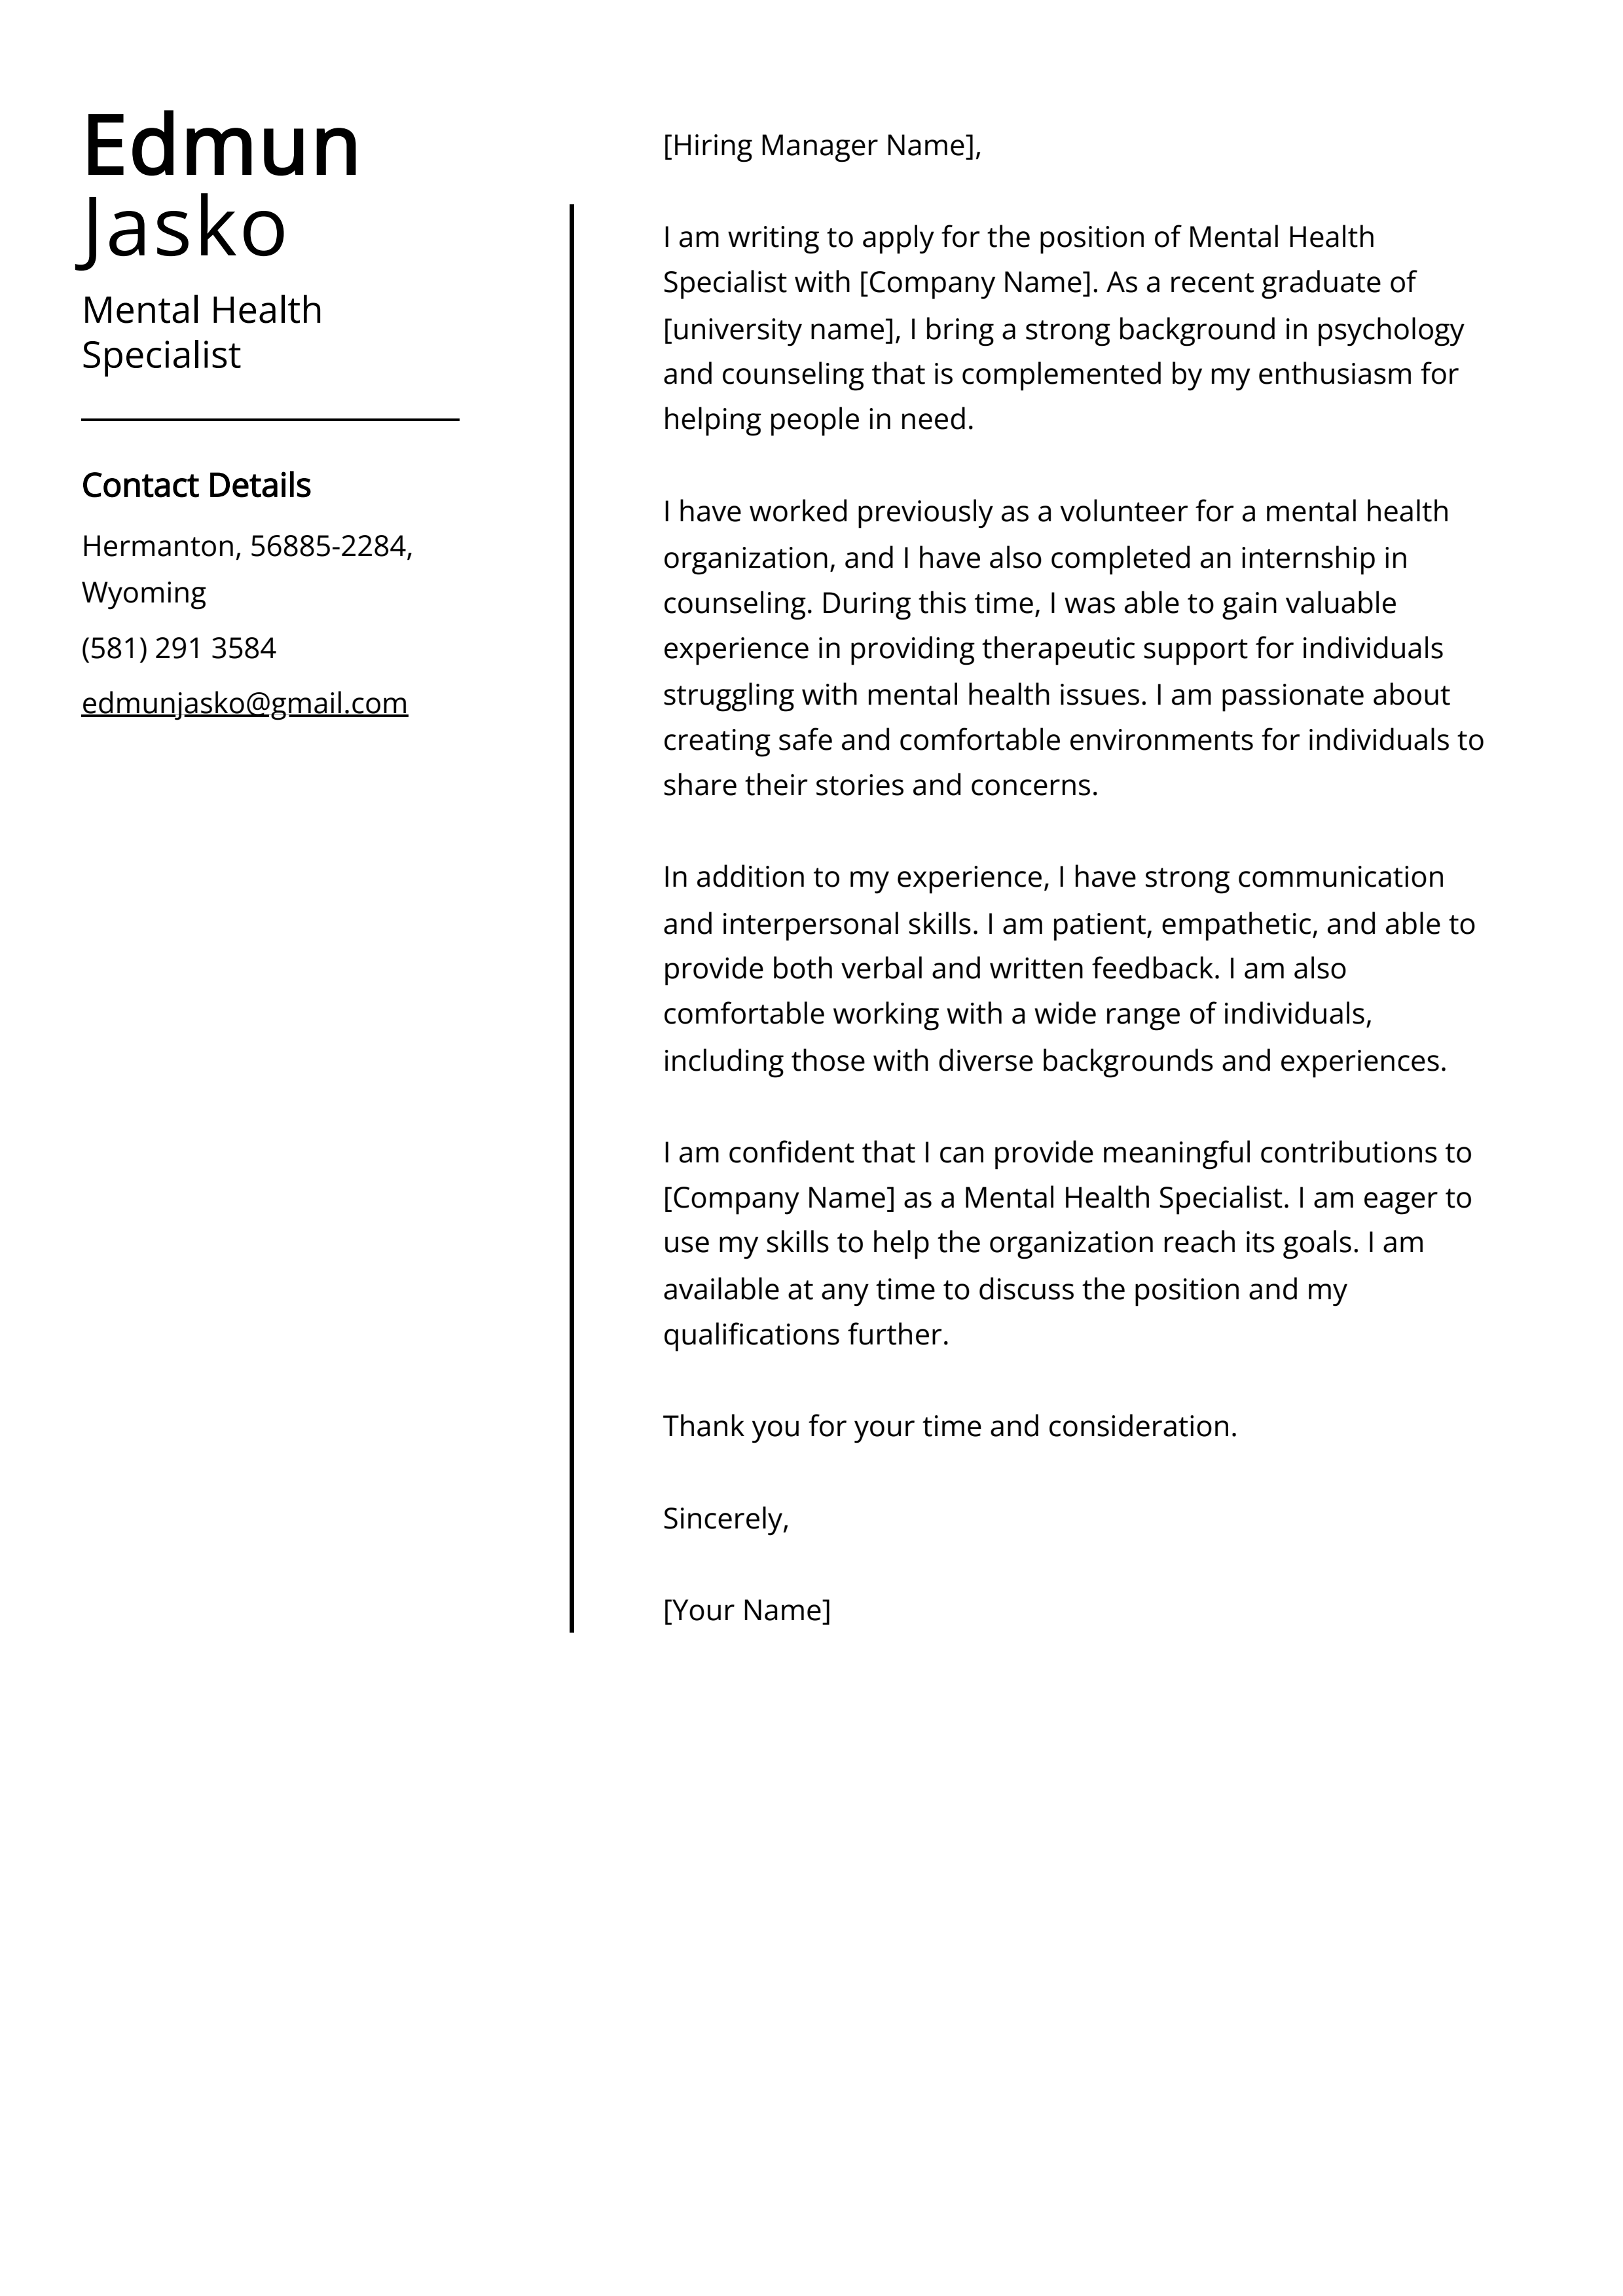 Mental Health Specialist Cover Letter Example